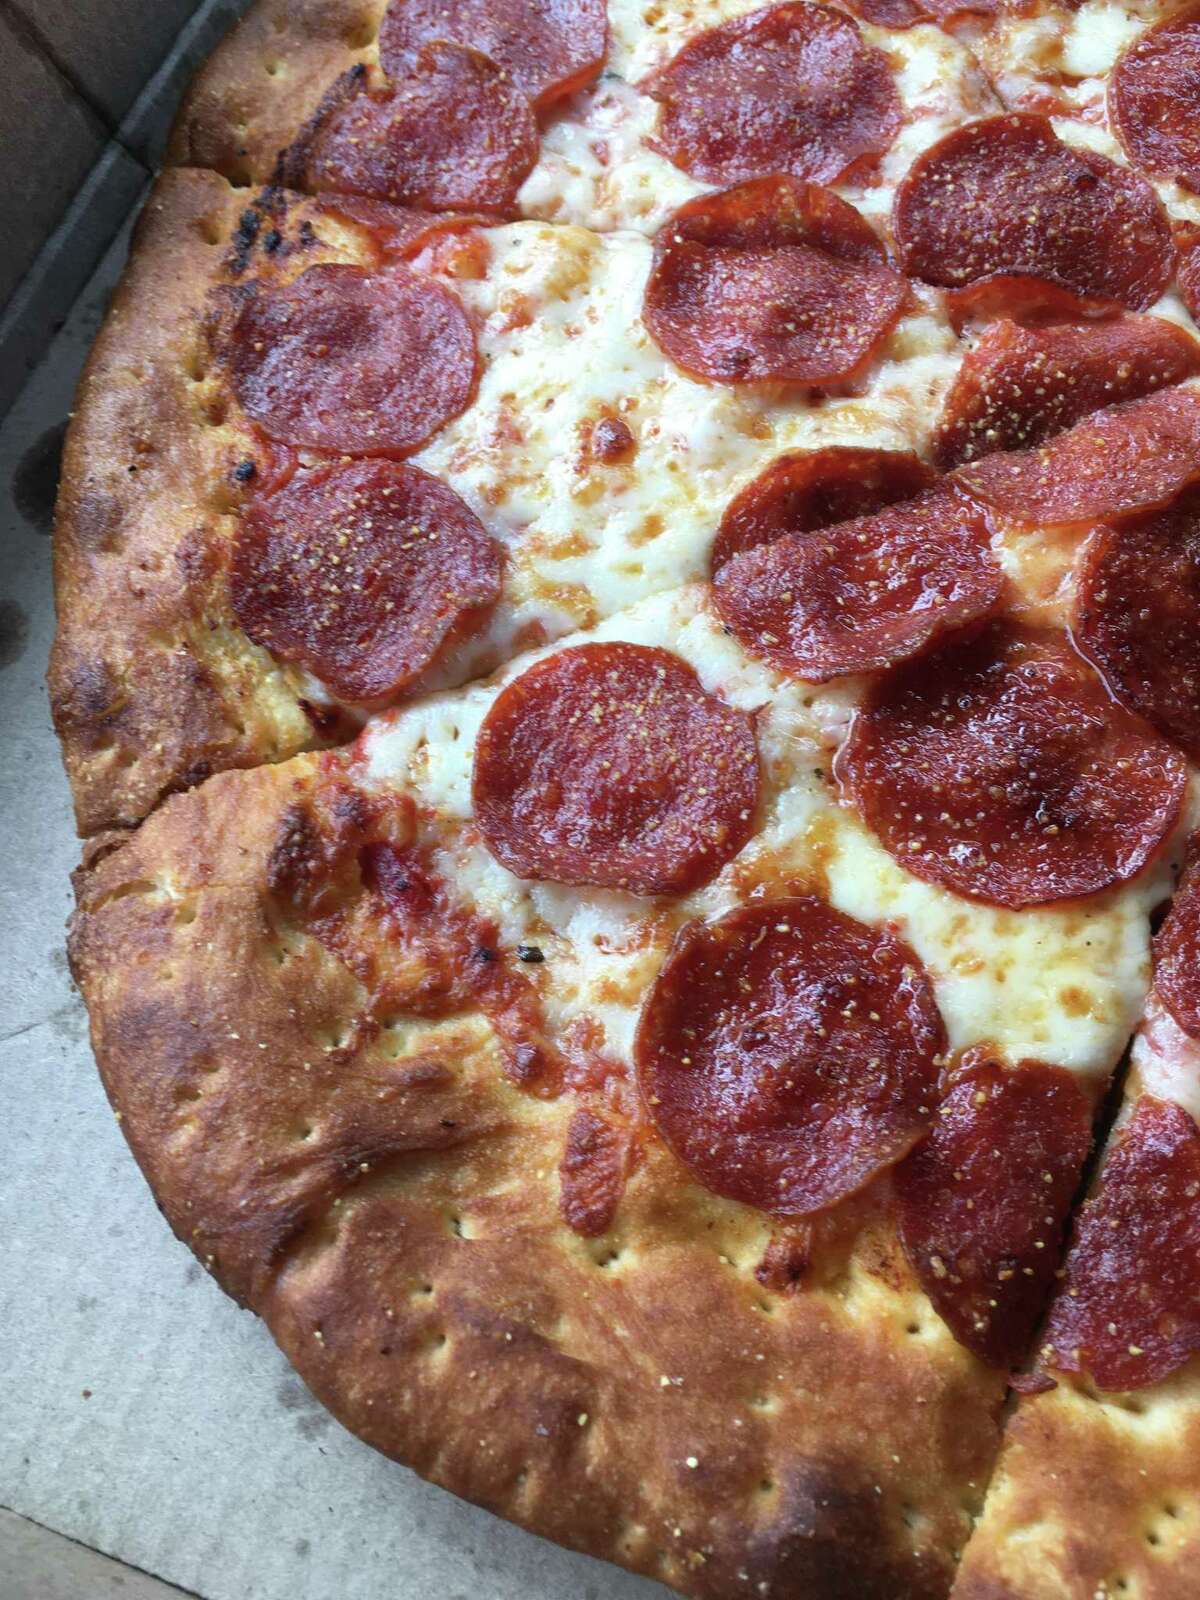 The Area 51 pizza at Maar's Pizza & More features 40 slices of pepperoni.